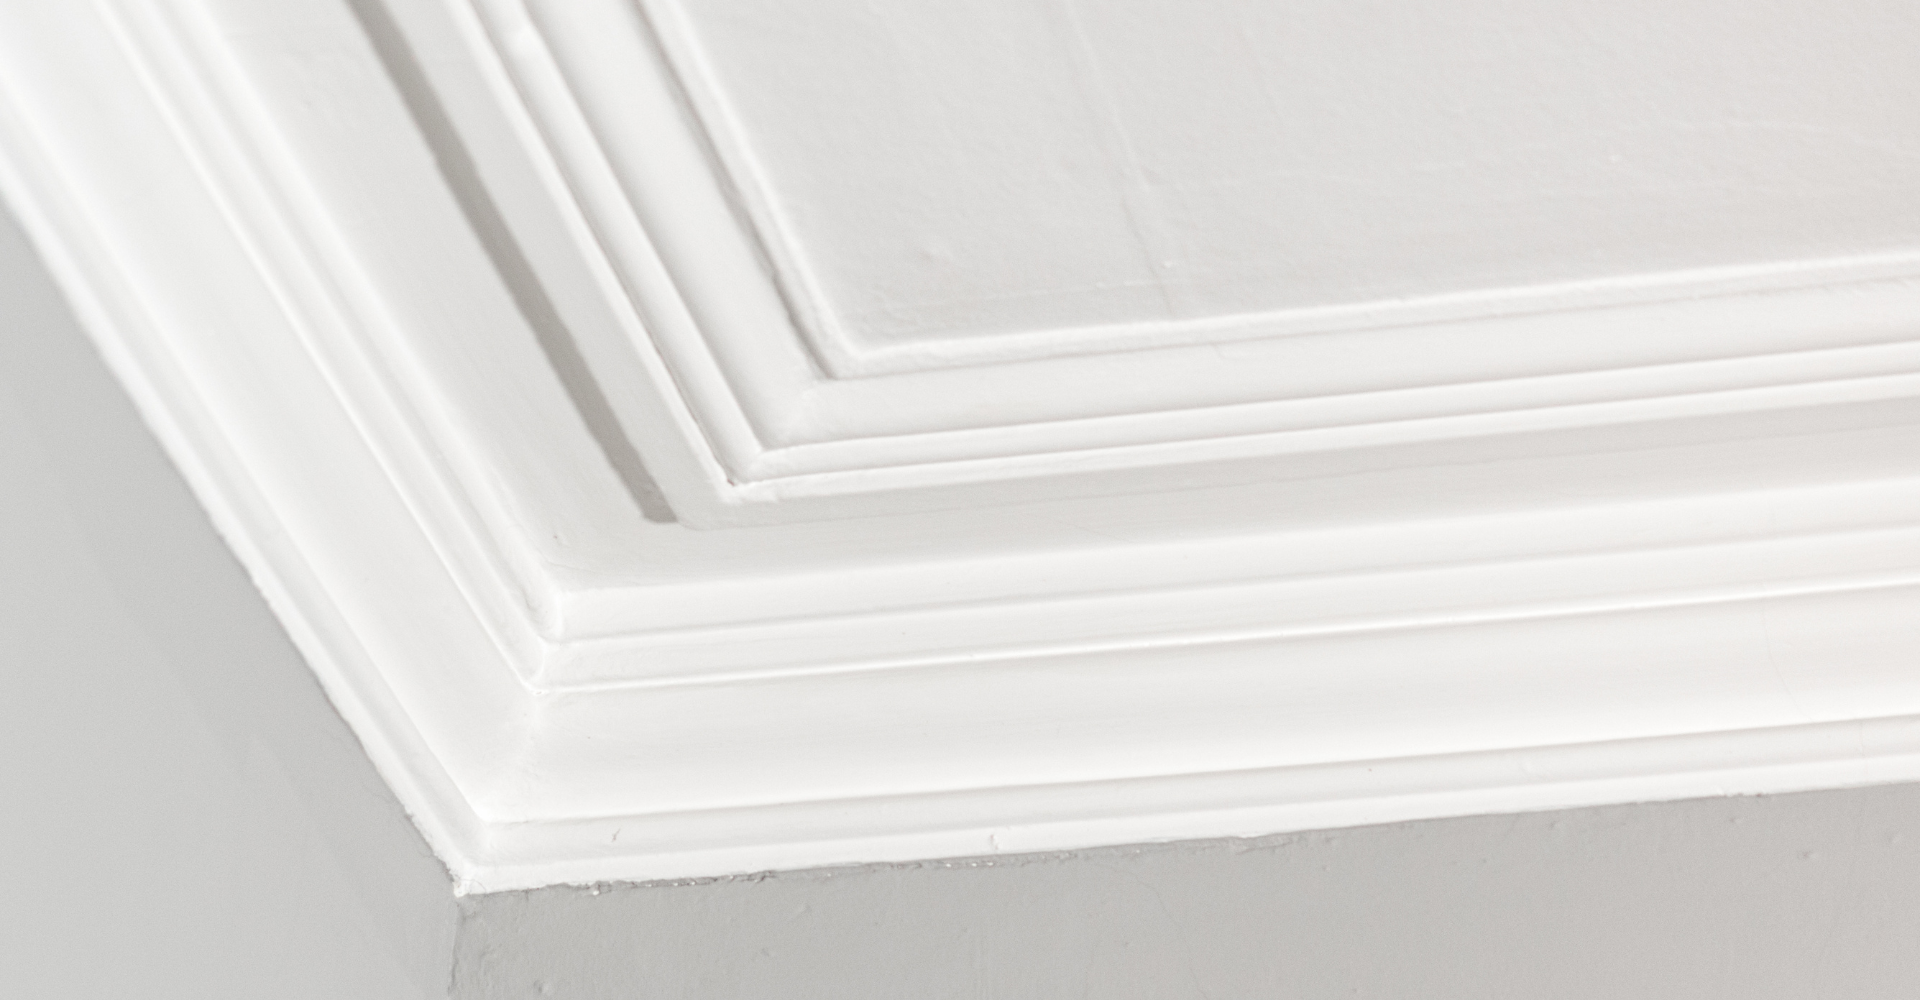 Flex Trim Moulding for Limitless Possibilities